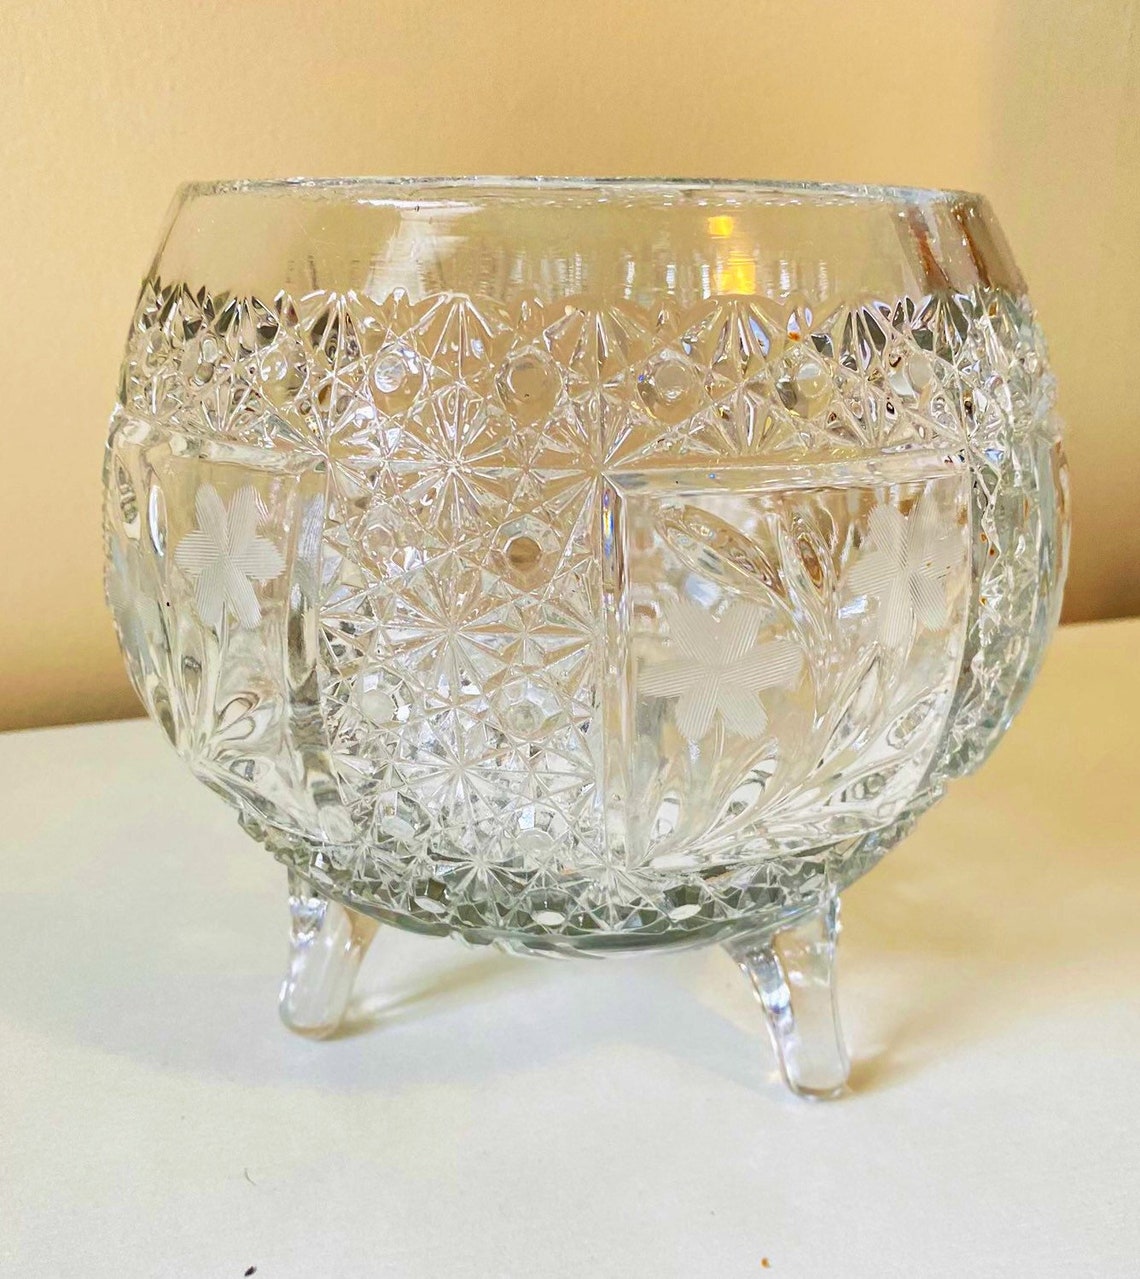 Vintage 1950s Large Footed Lead Crystal Bowl with Frosted | Etsy